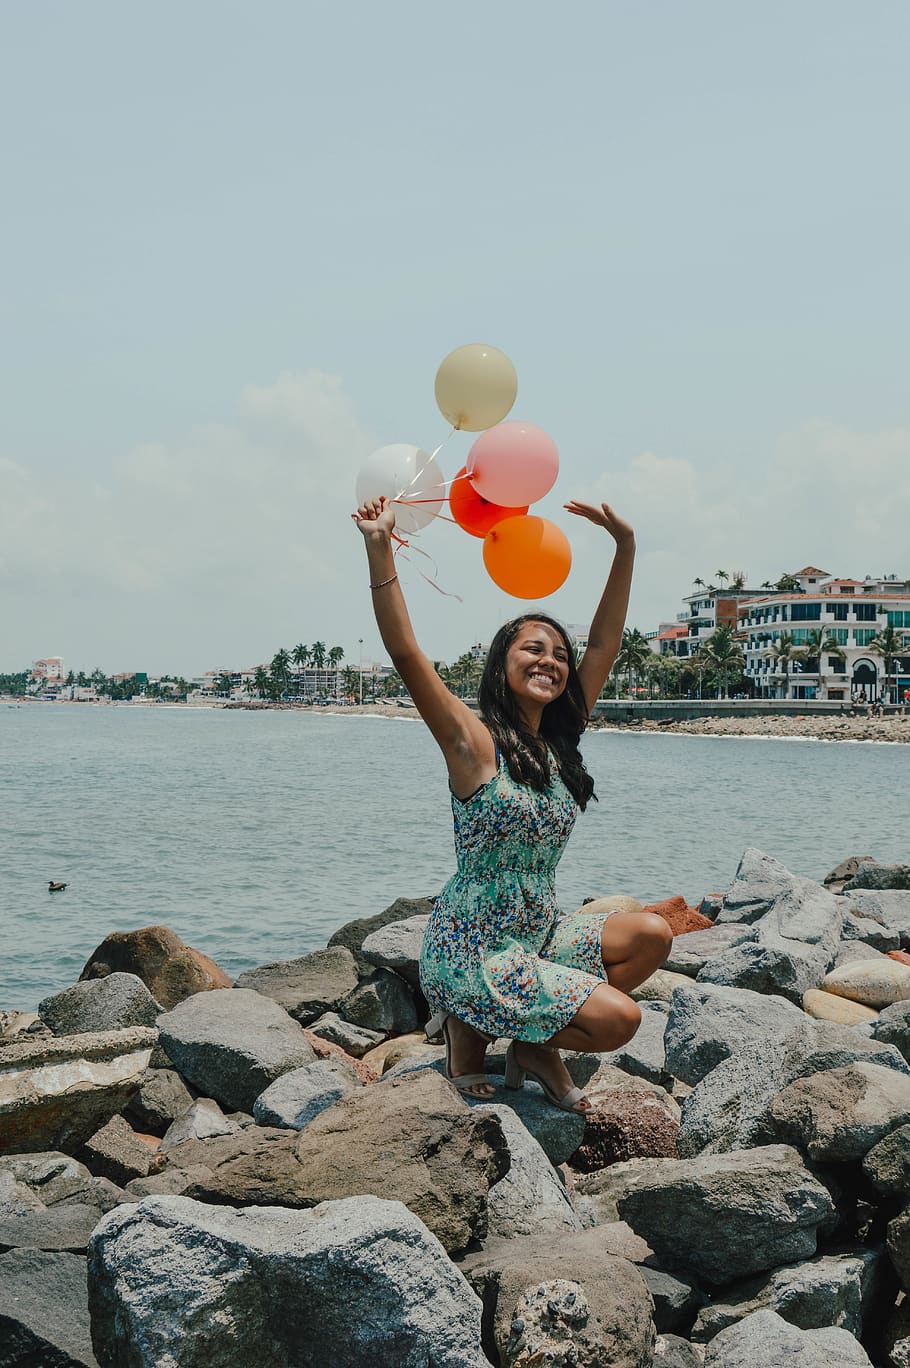 Woman Sitting While Holding Balloons Near Body of Water, afternoon